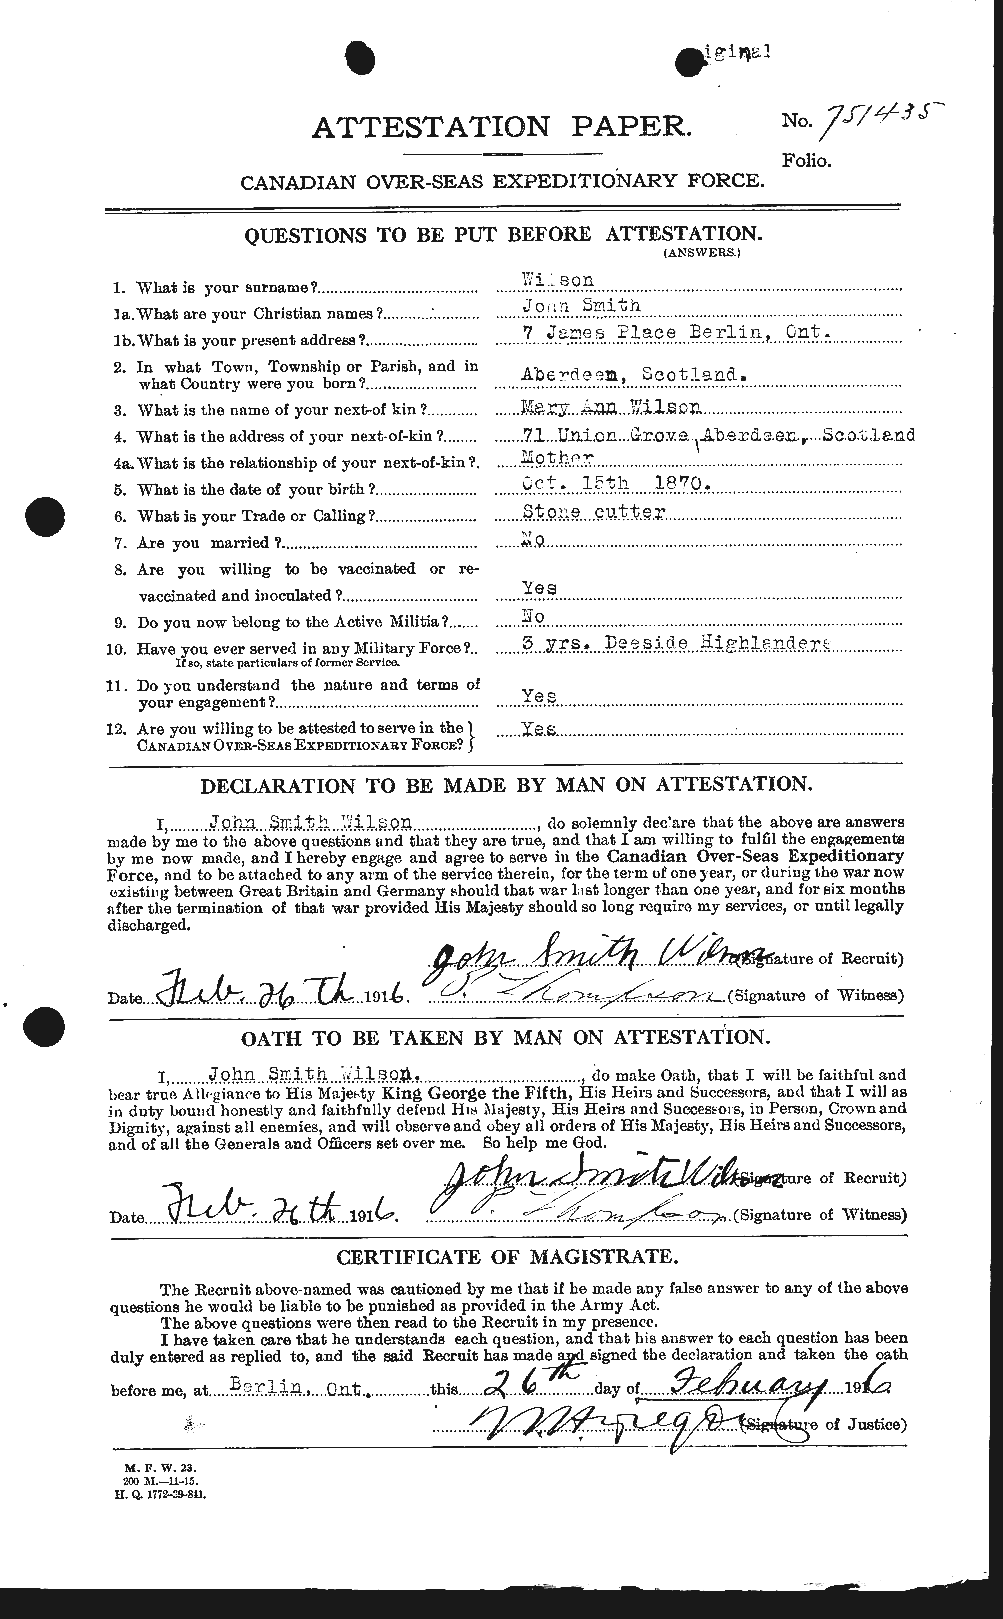 Personnel Records of the First World War - CEF 683386a